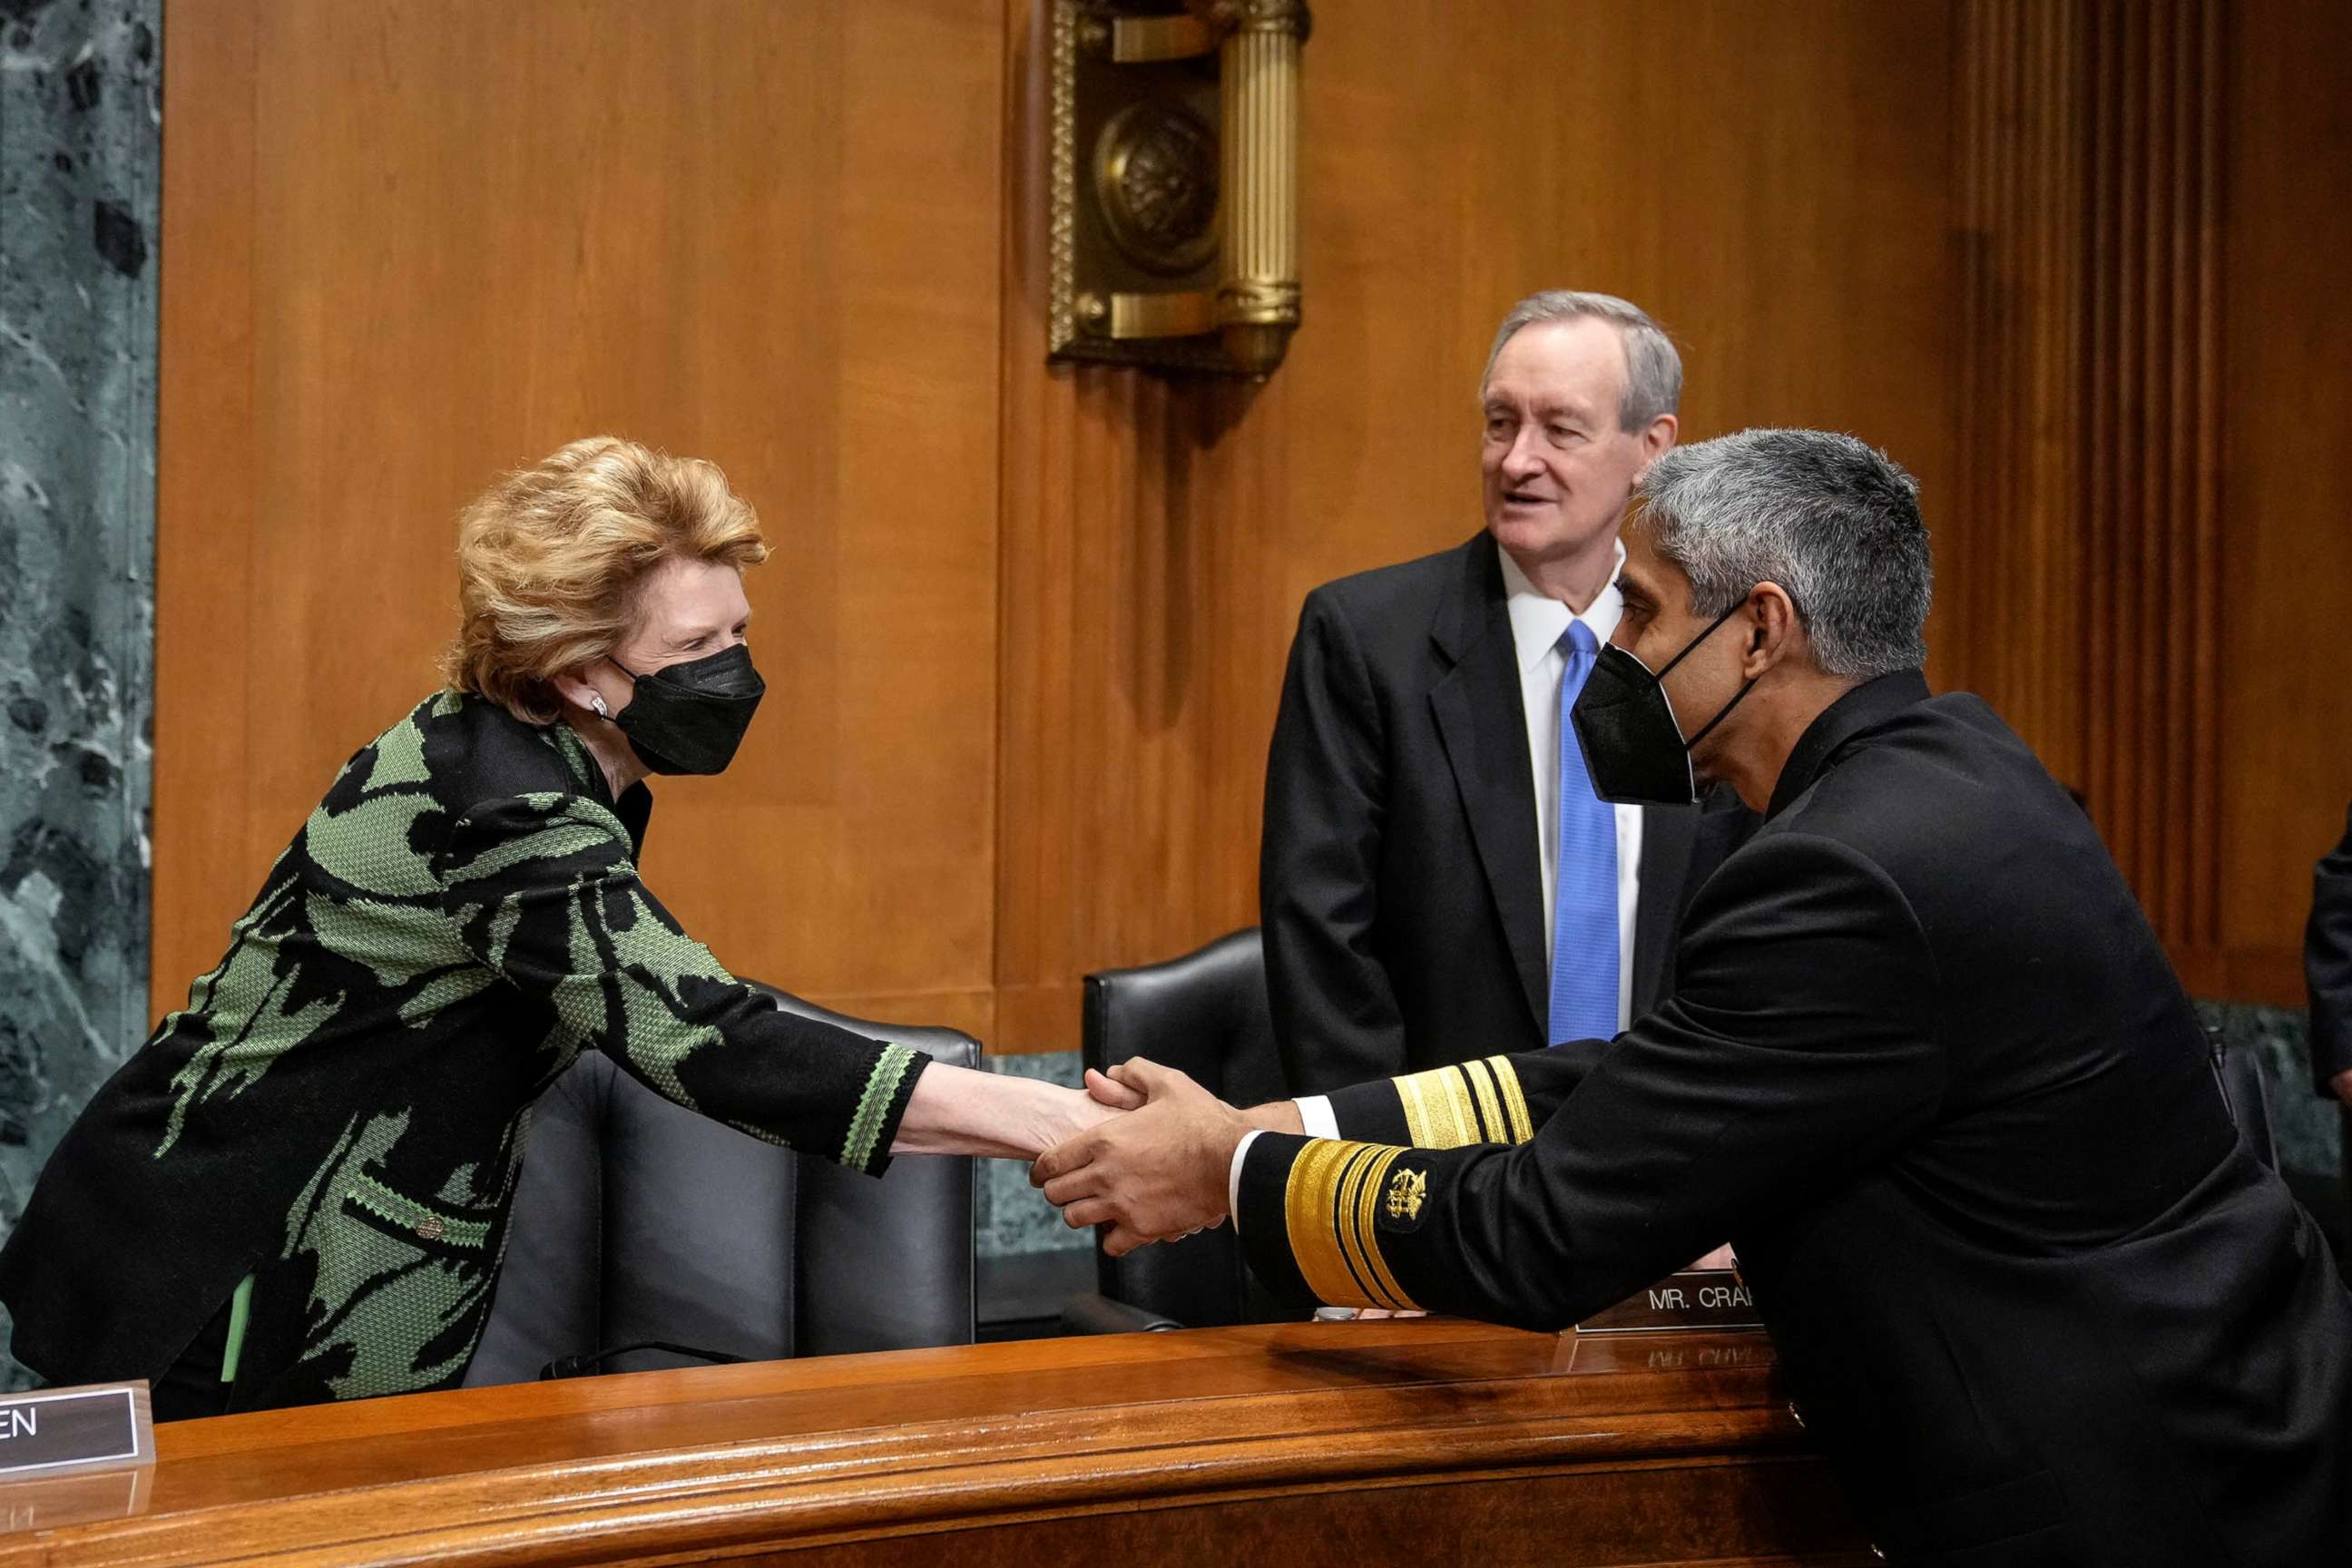 PHOTO: Sen. Debbie Stabenow greets Surgeon General Dr. Vivek Murthy as he arrives for a Senate Finance Committee hearing about youth mental health on Capitol Hill, Feb. 8, 2022.